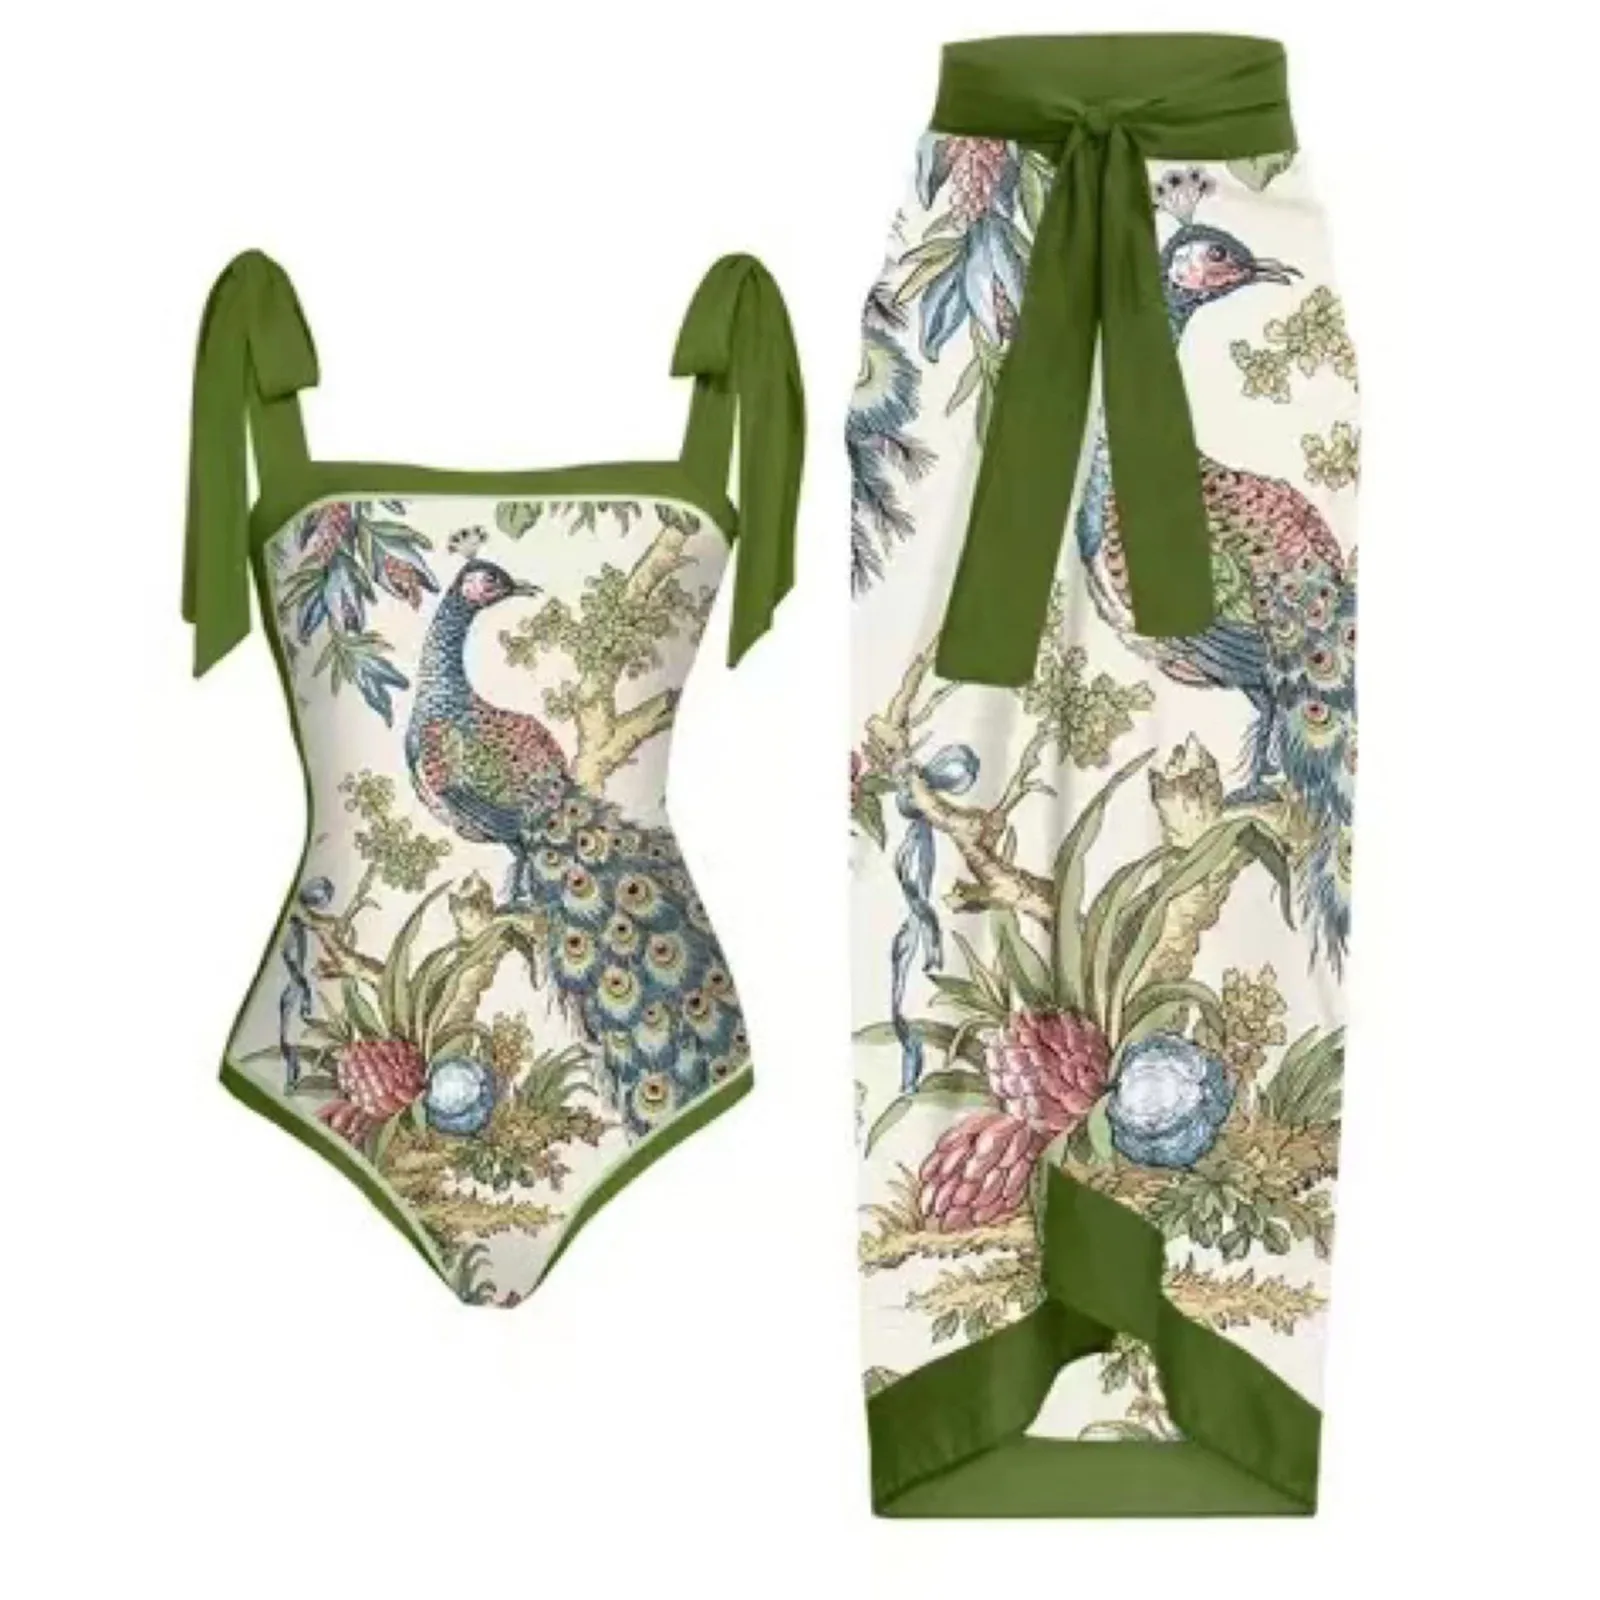 

Women Vintage Colorblock Abstract Floral Print 1 Piece Swimwear+1 Piece Cover UP Two Piece Vintage Print Swimsuit Monokini